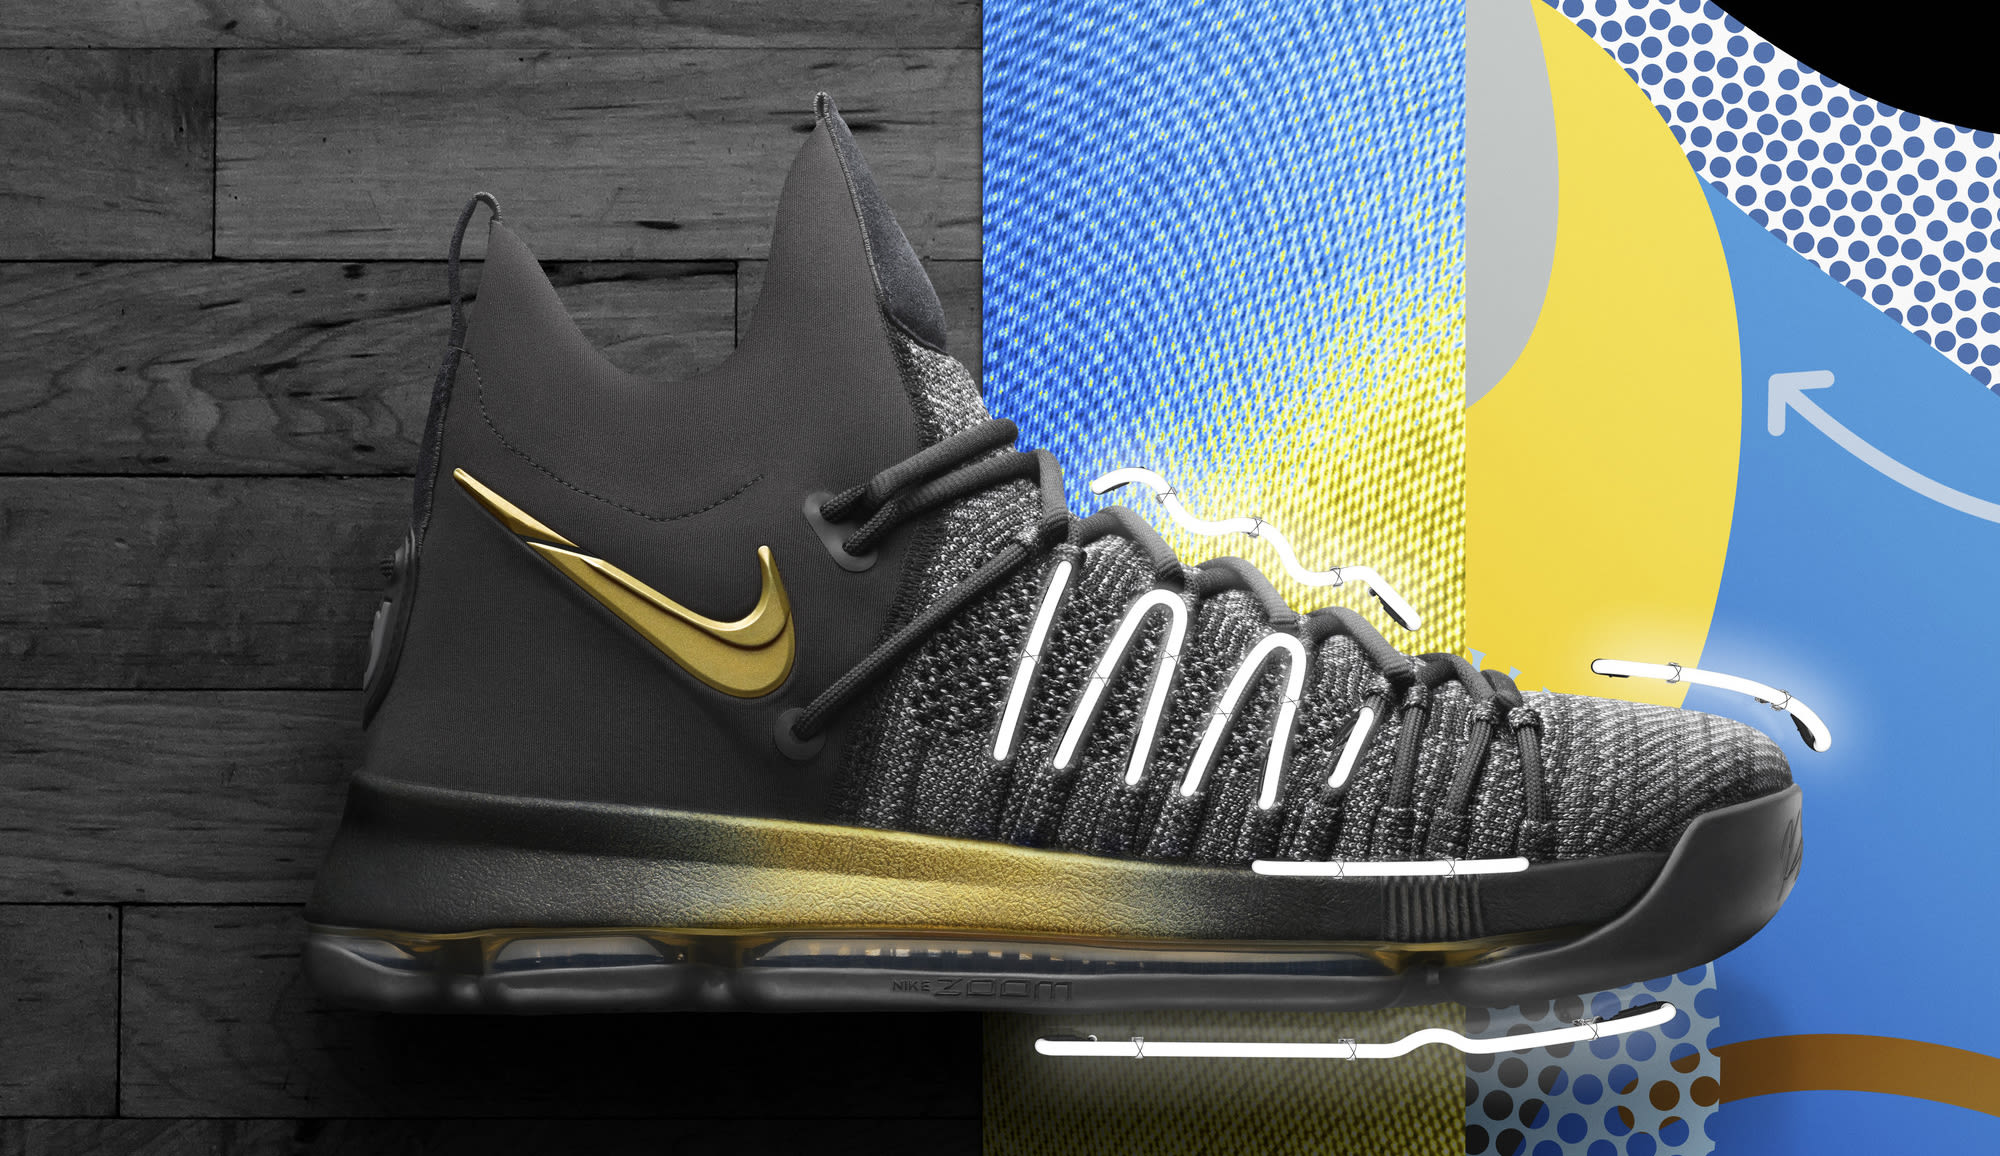 nike lebron collection sneakers kd